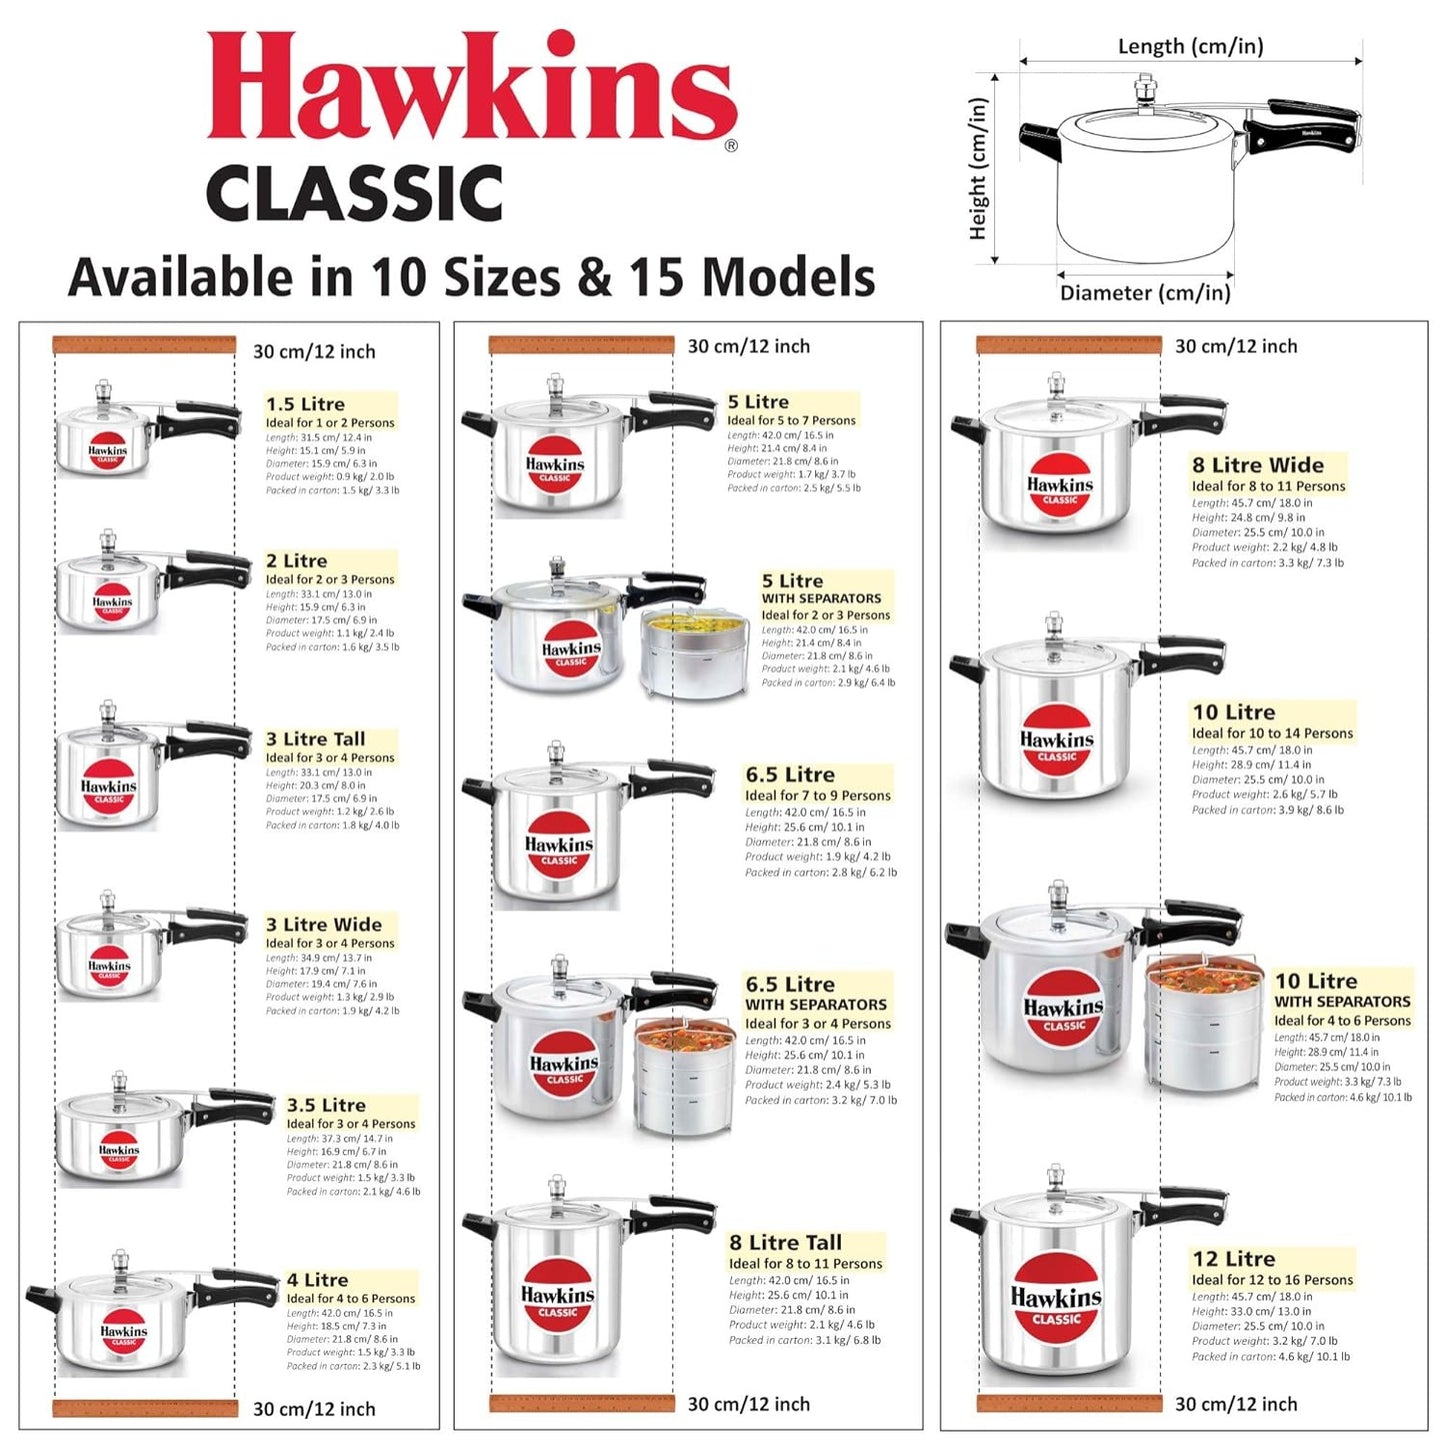 Hawkins Classic Aluminium Non-Induction Base Inner Lid Pressure Cooker, 8 Litres Tall